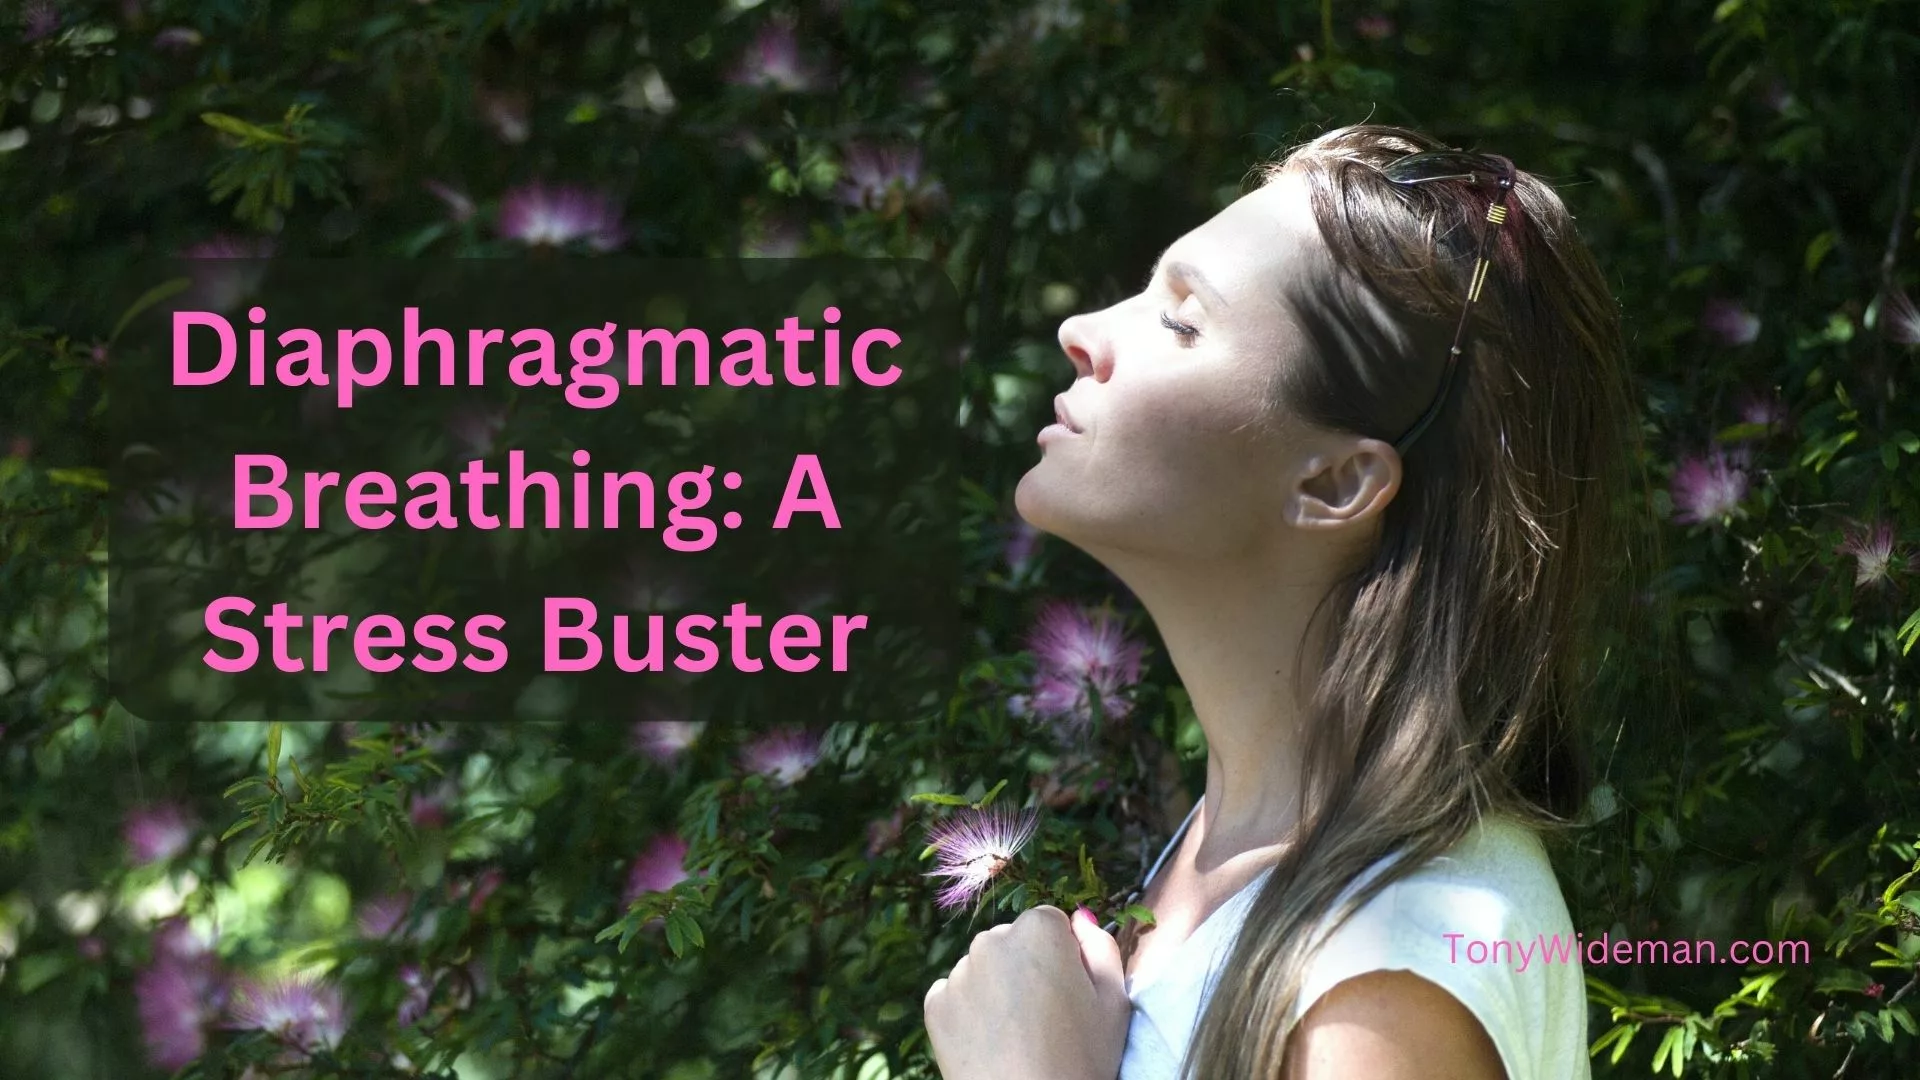 Diaphragmatic Breathing: A Stress Buster